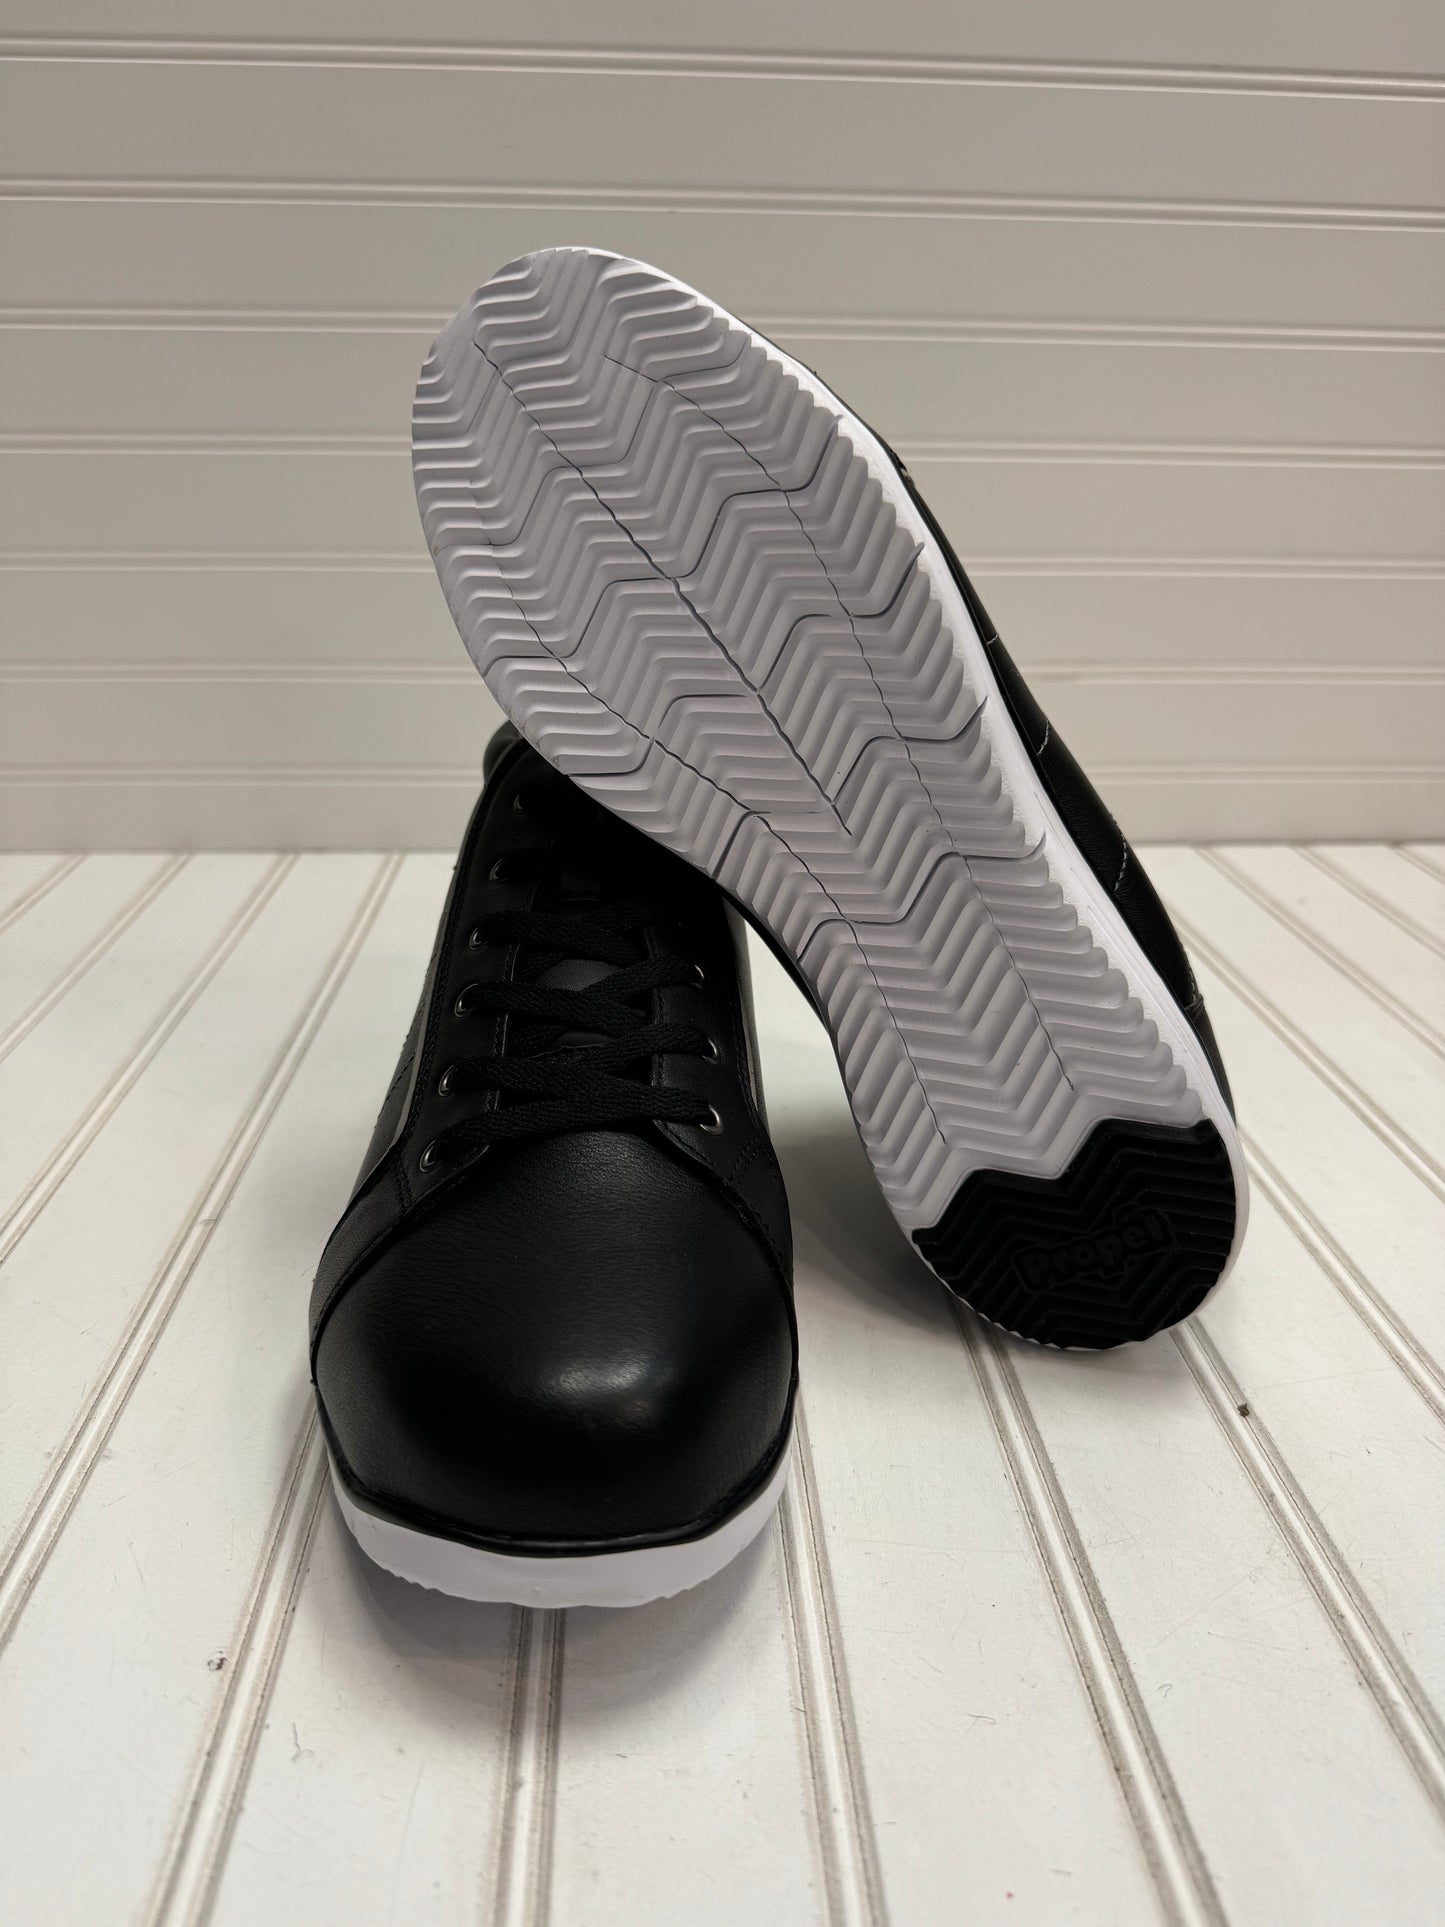 Black & White Shoes Sneakers Cmb, Size 10